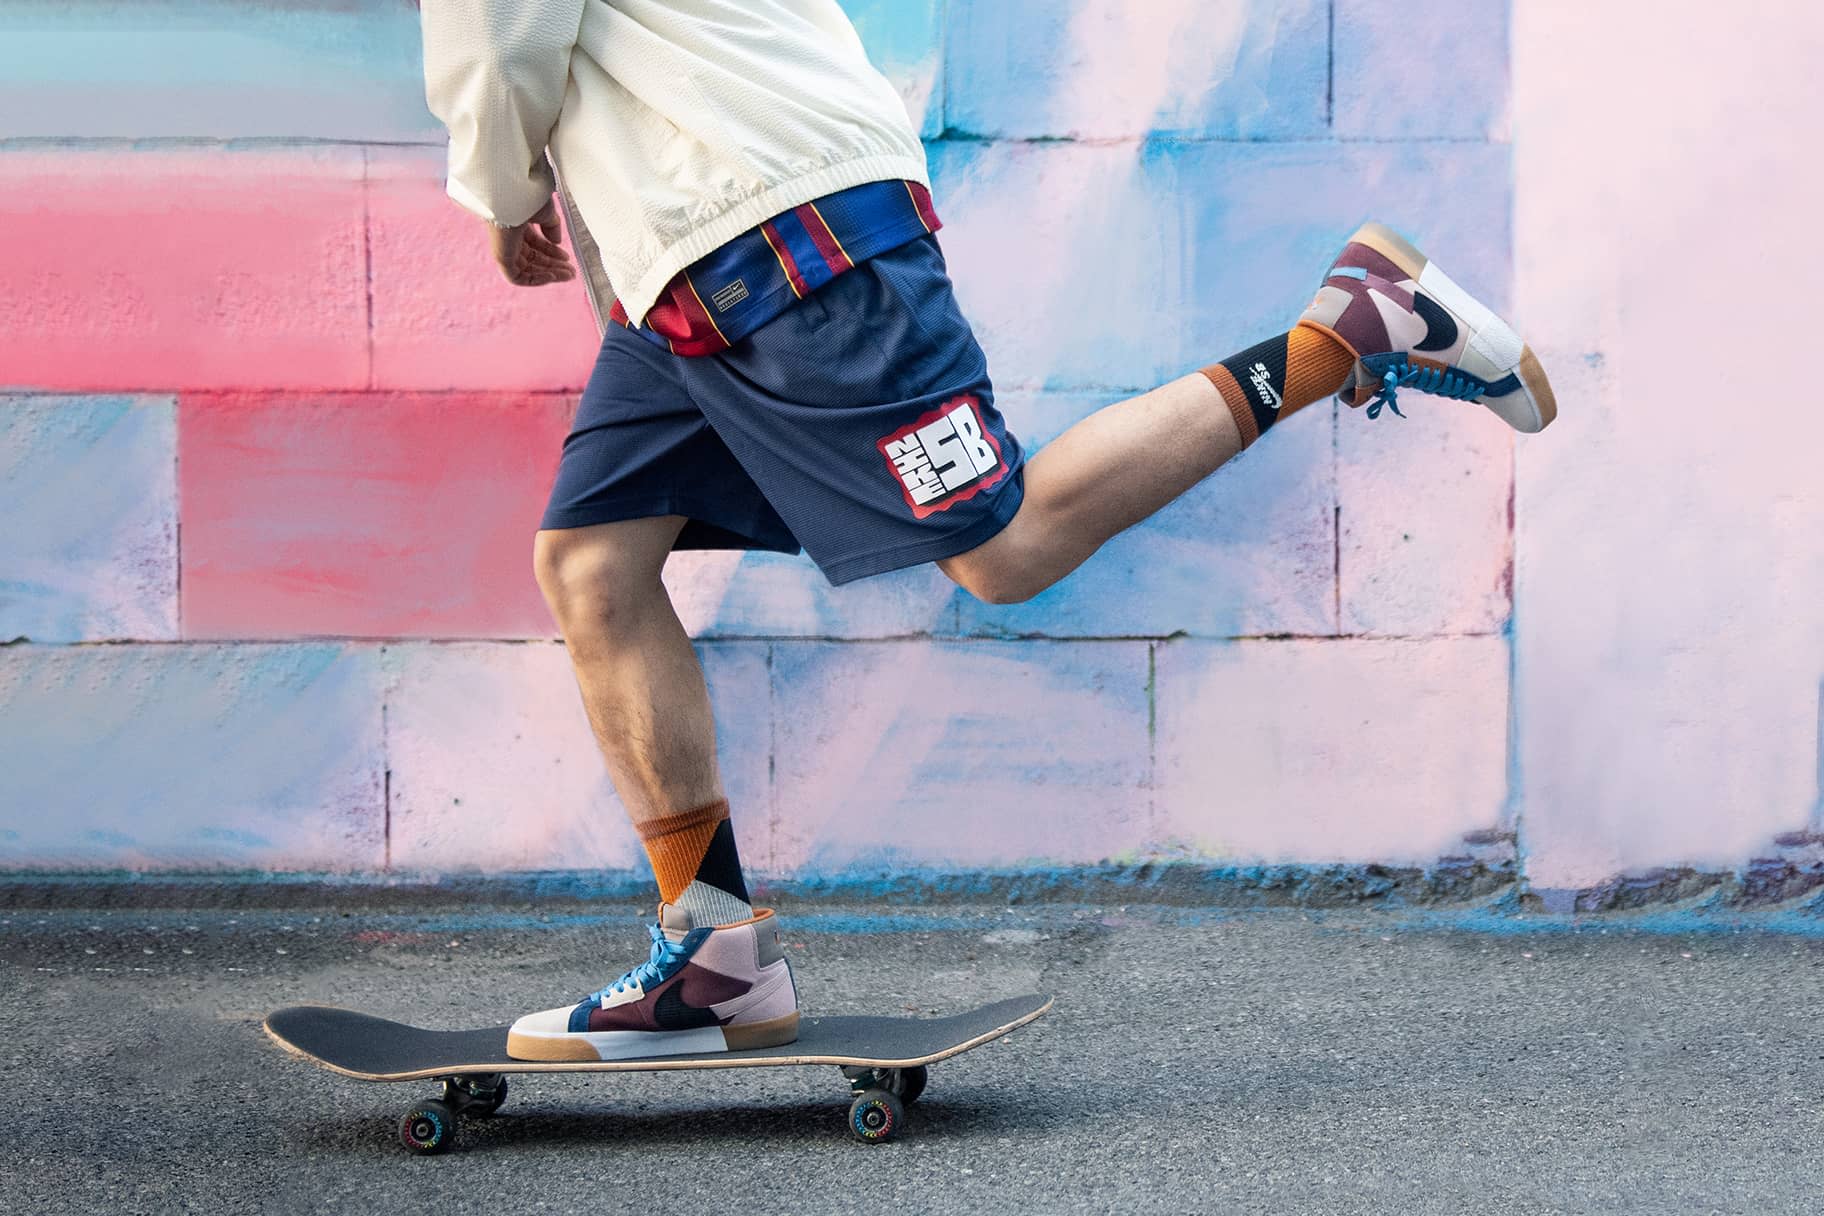 How To Start Skateboarding As an Adult